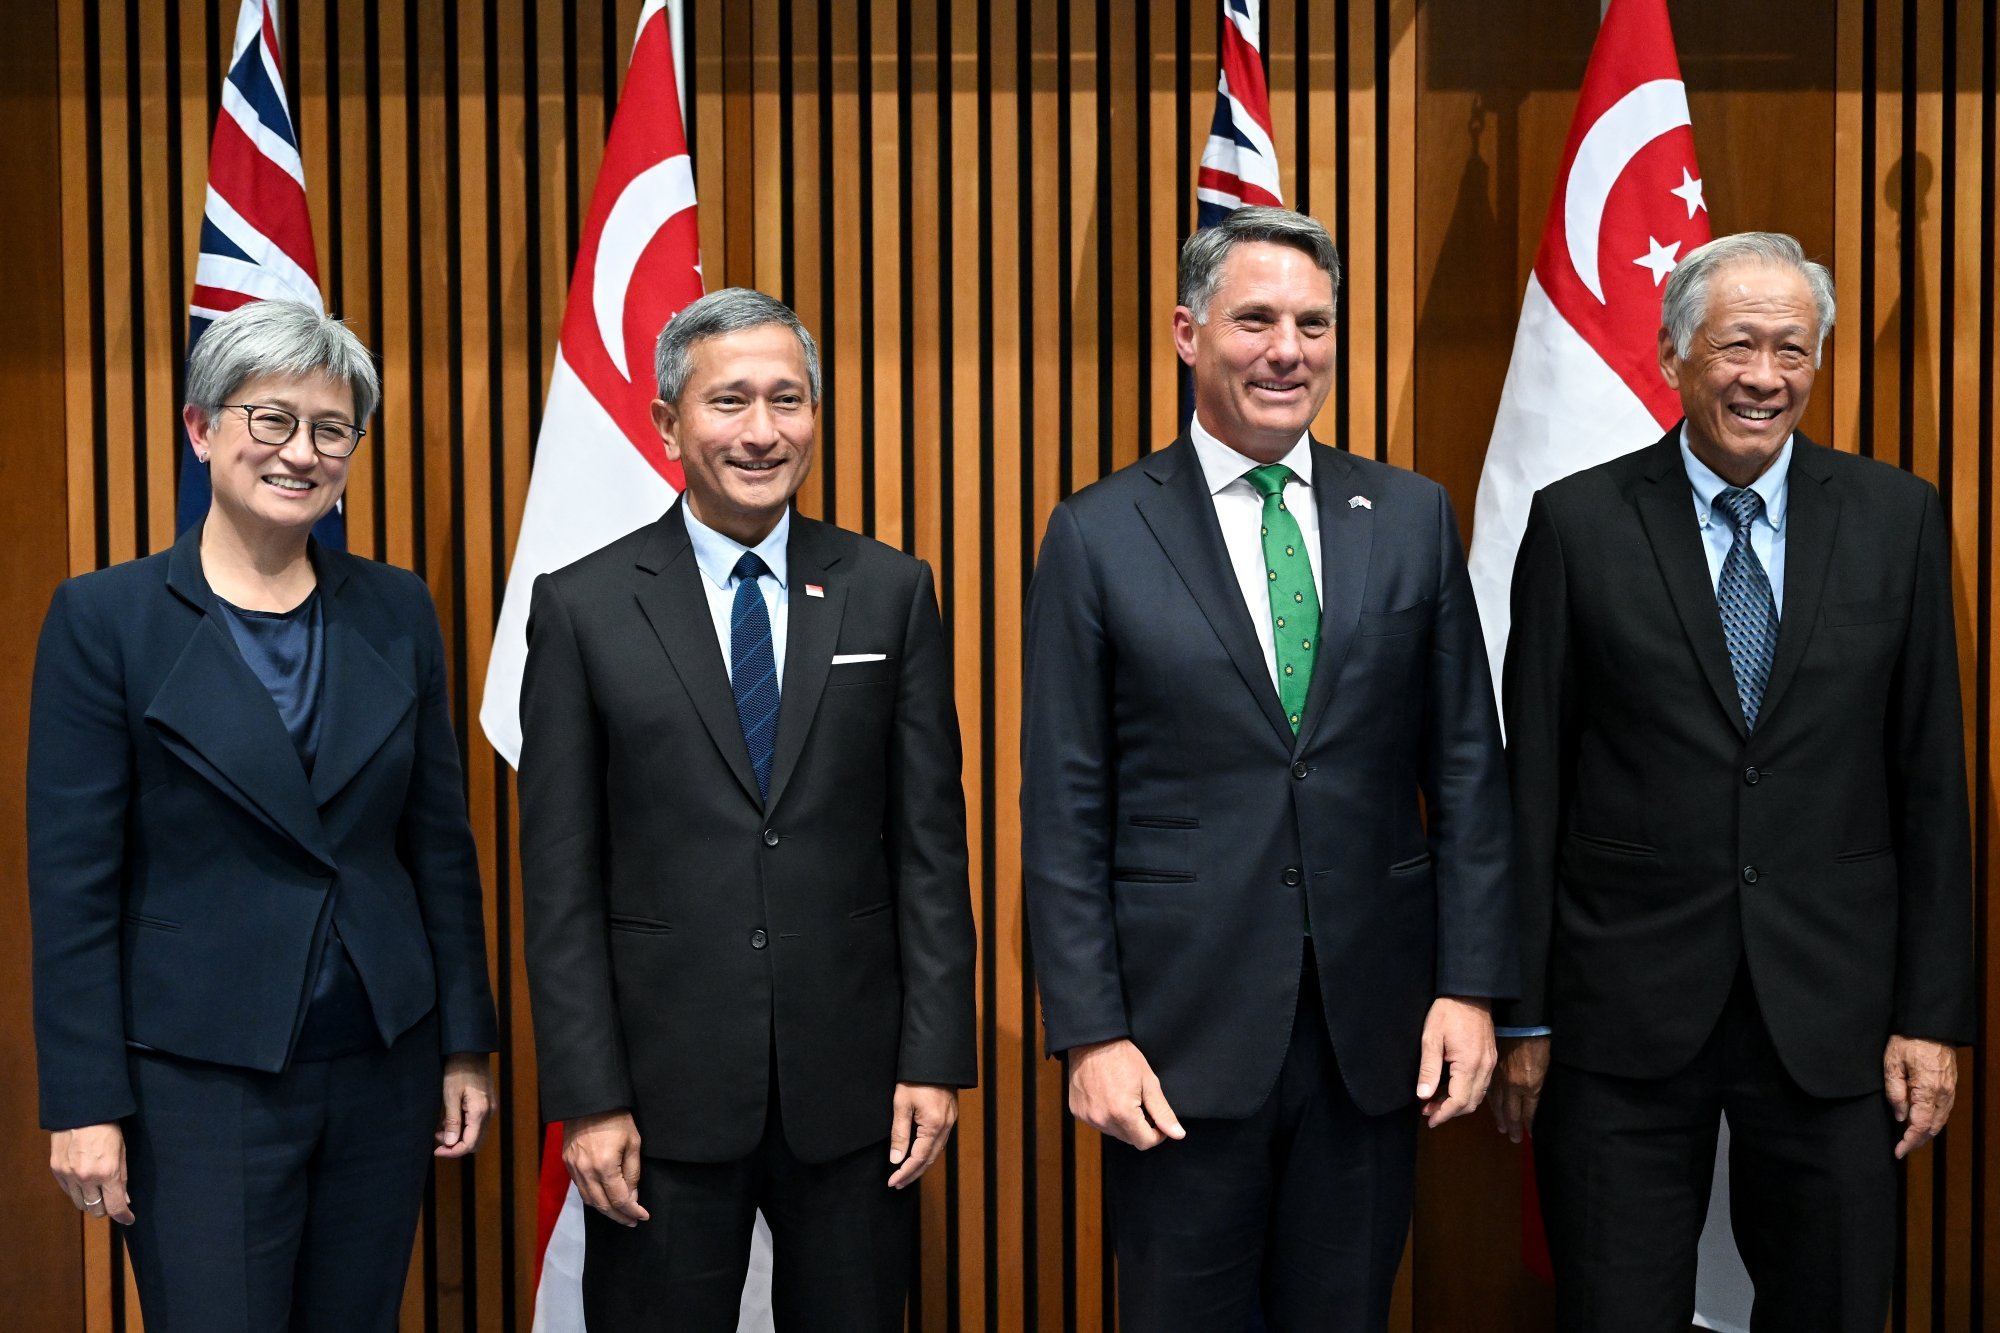 (From left) Australian Foreign Minister Penny Wong, Singaporean Foreign Minister Vivian Balakrishnan, Australian Defence Minister Richard Marles and Singaporean Defence Minister Ng Eng Hen during the Singapore-Australia Joint Ministerial Committee meeting at Parliament House in Canberra on Monday. Photo: EPA-EFE